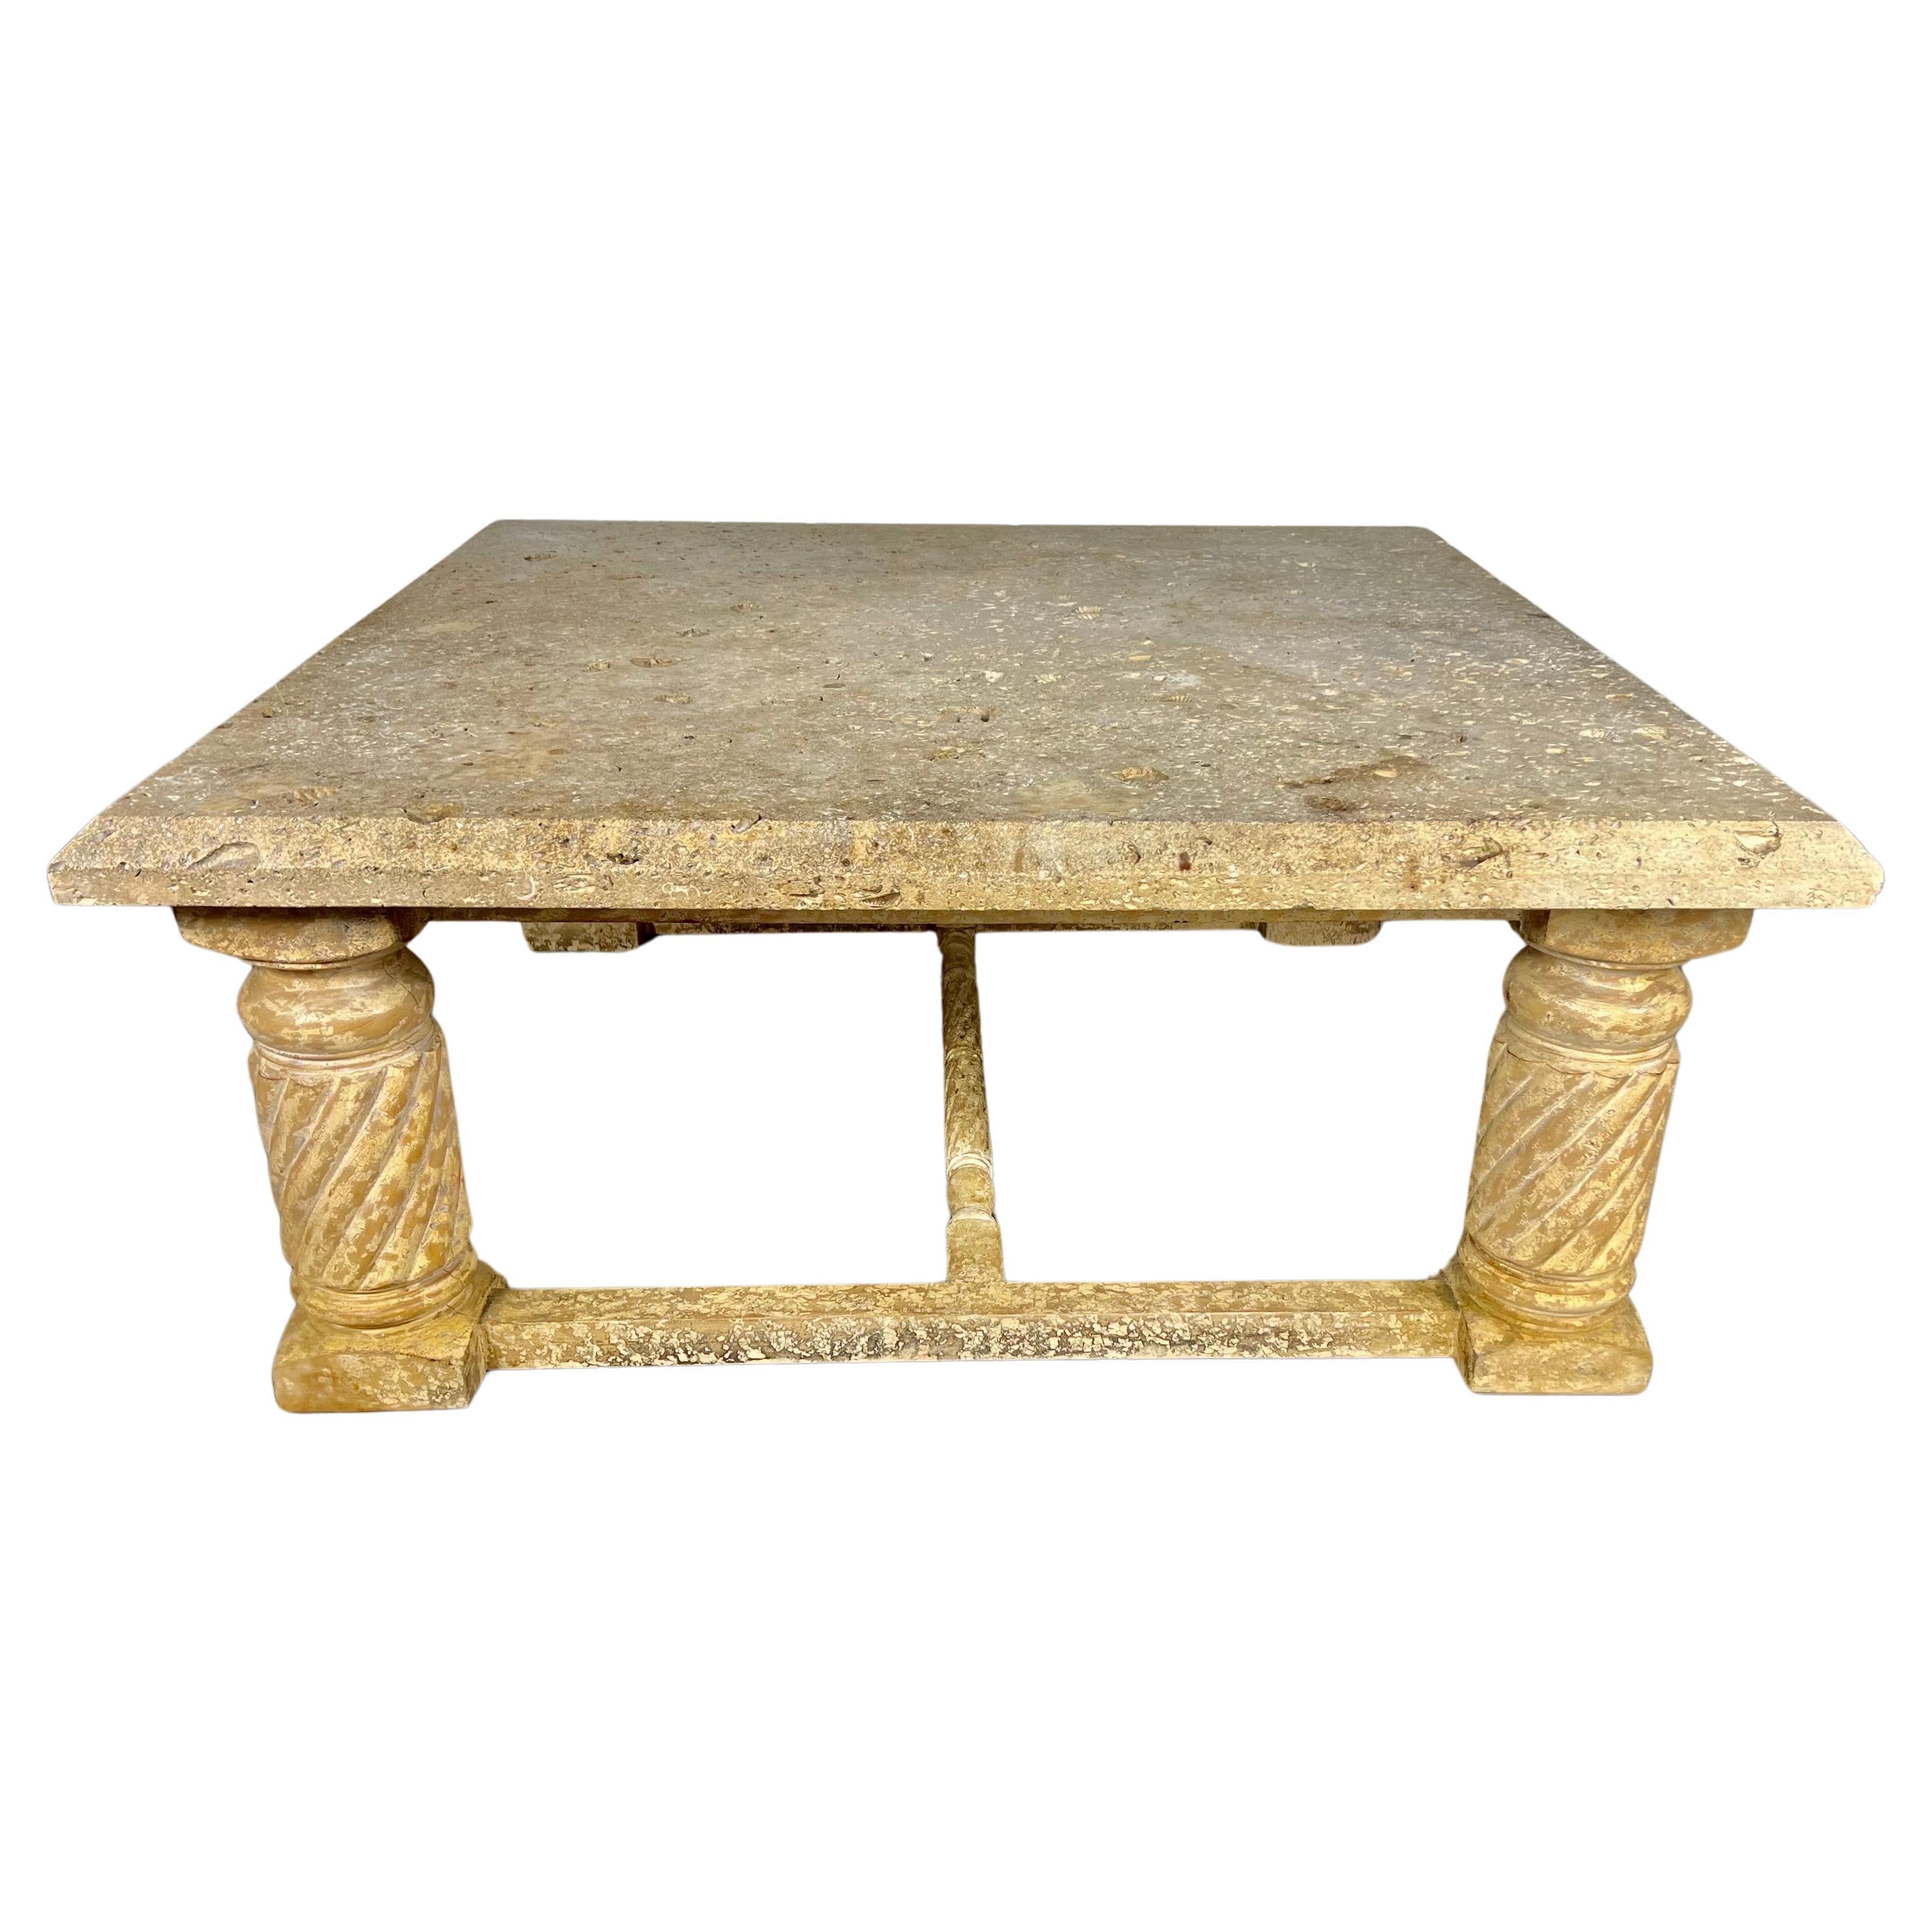 Late 20th century Italian Neoclassical style coffee table.  The table stands on four twisted wood straight legs.  The wood base has a beautiful crackled finish.  The limestone top has indentations of shells throughout.  It is a beautiful large scale